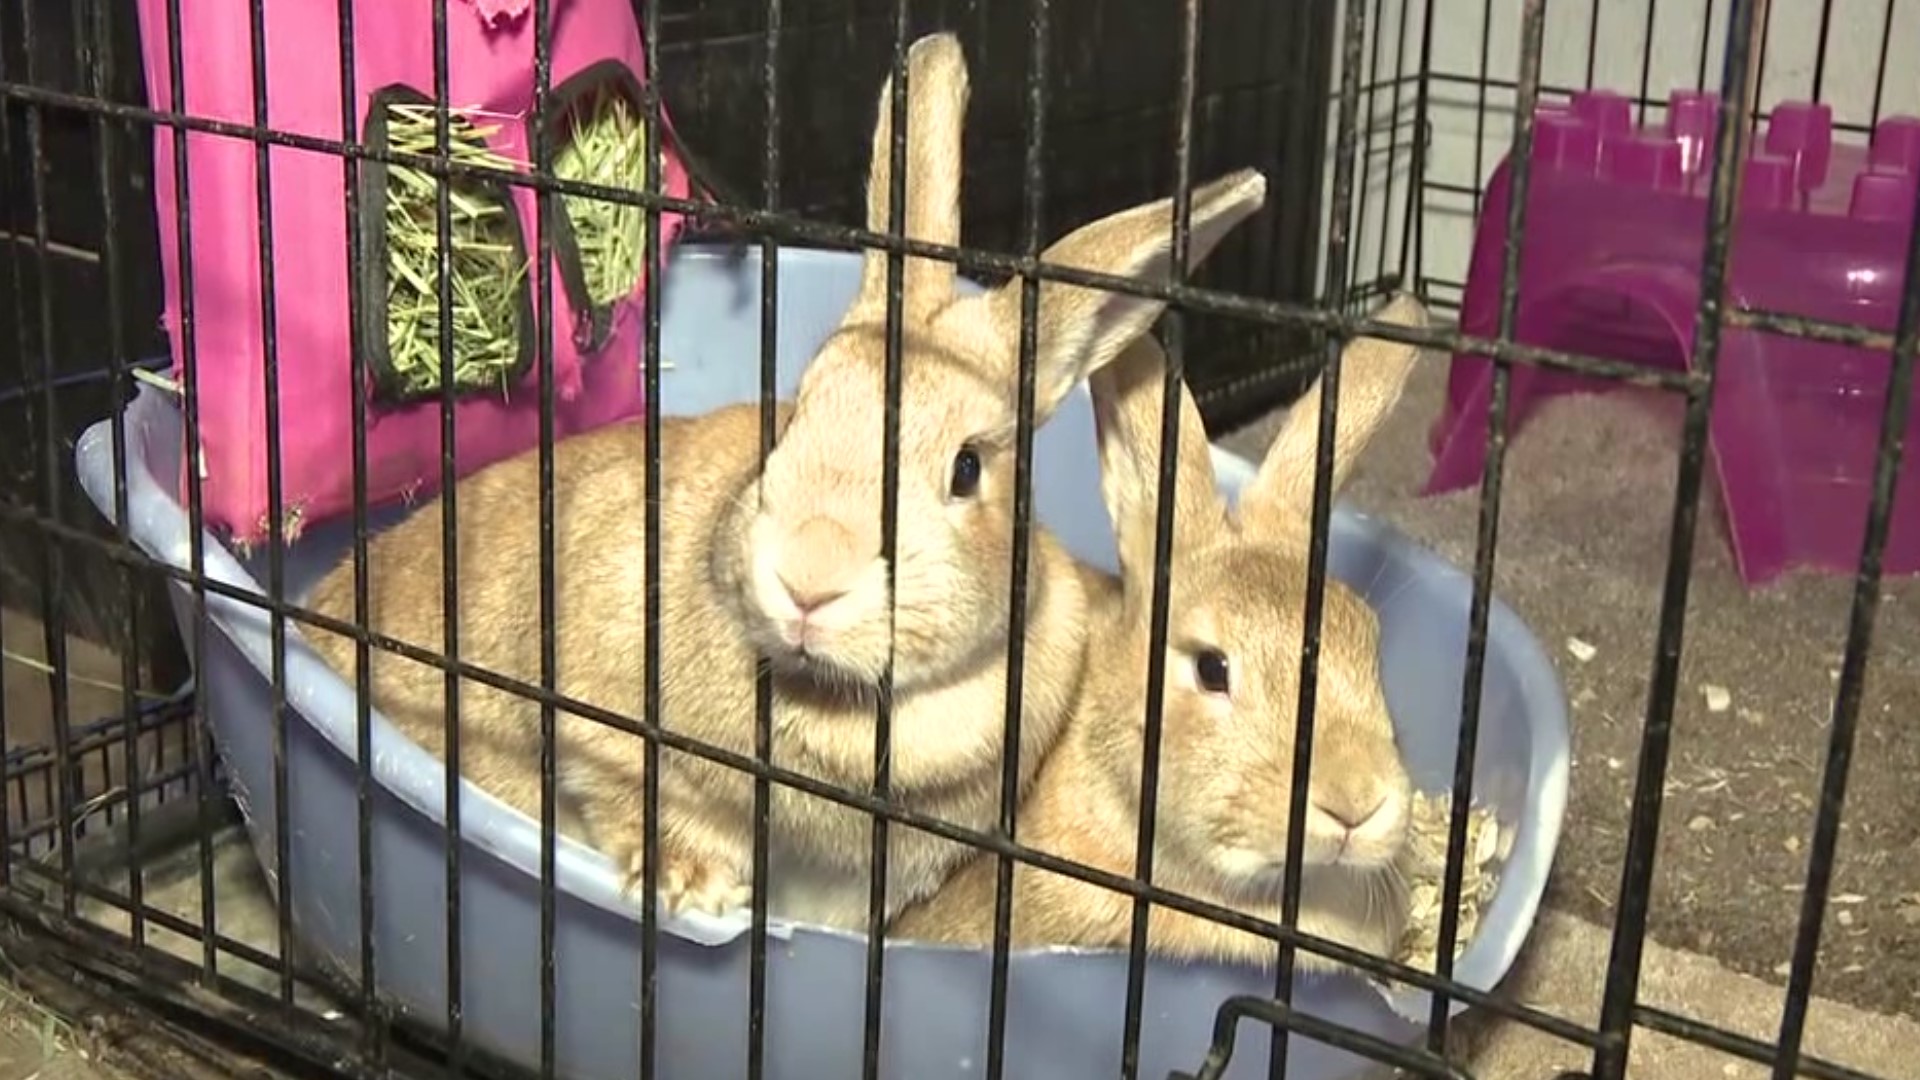 An animal rescue in Snyder County says bringing home a bunny or other small animal at Easter might not be a good idea.